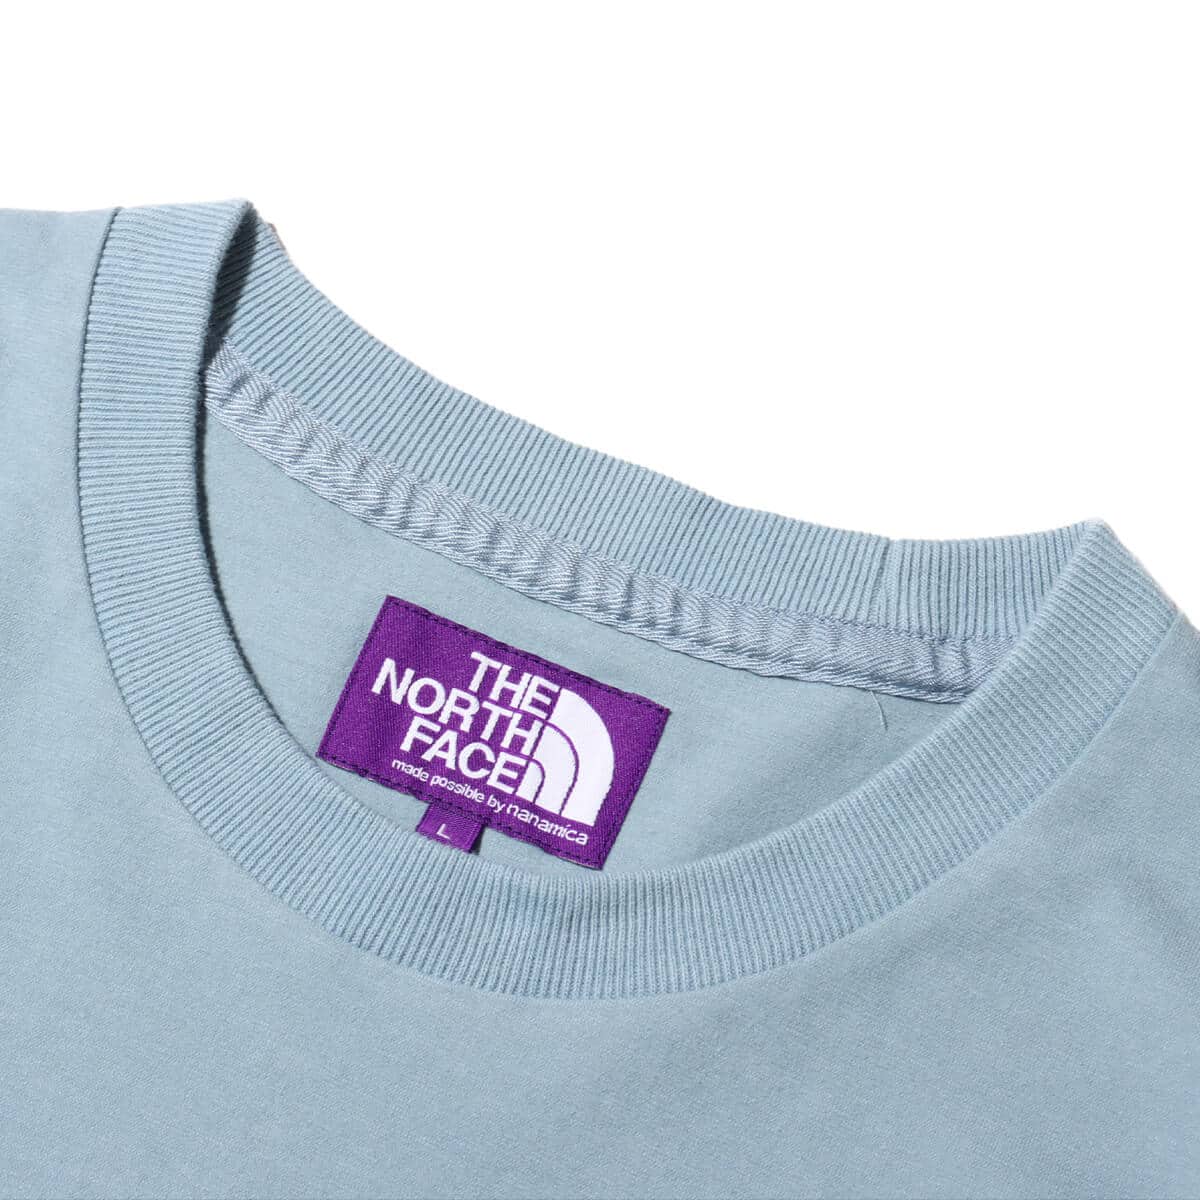 THE NORTH FACE PURPLE LABEL High Bulky Pocket Tee Sax